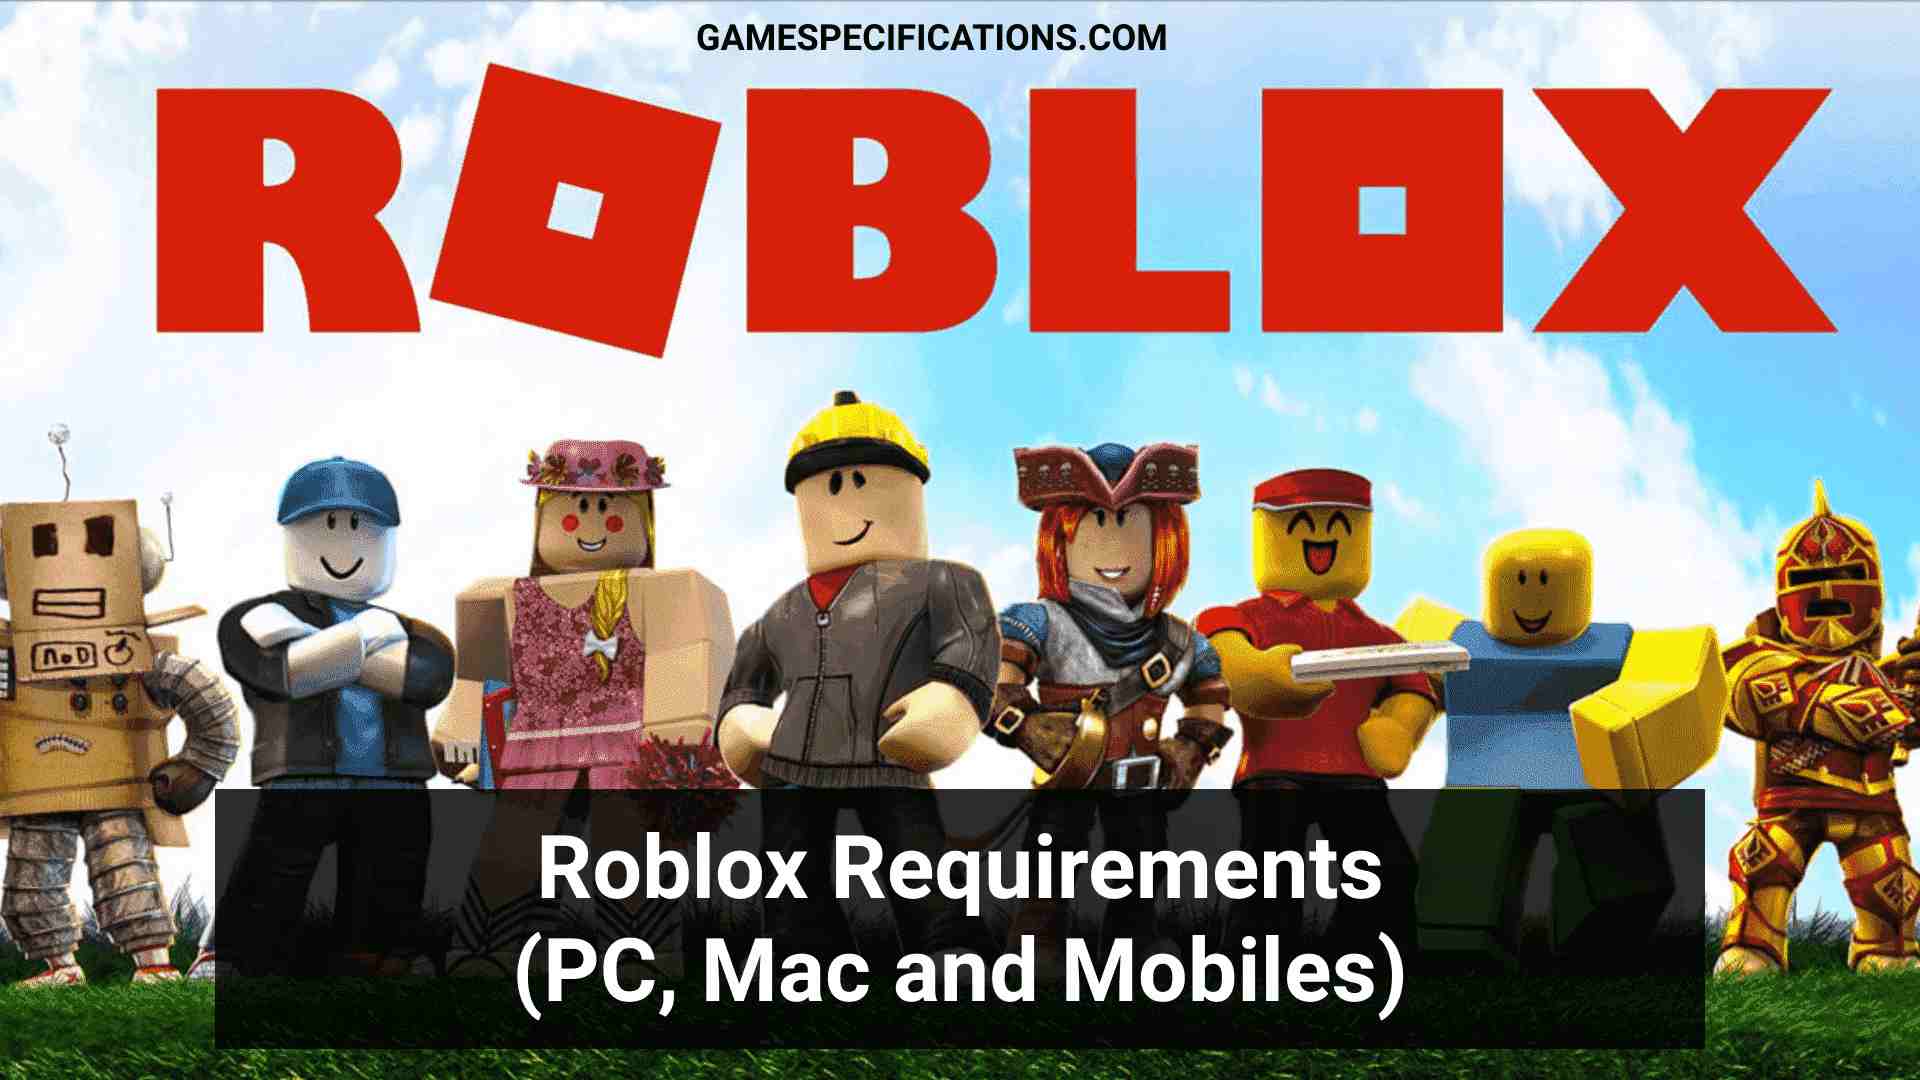 Roblox Requirements For Windows Pc Mac Android Ios Xbox And Ps4 Game Specifications - roblox download for ipod touch